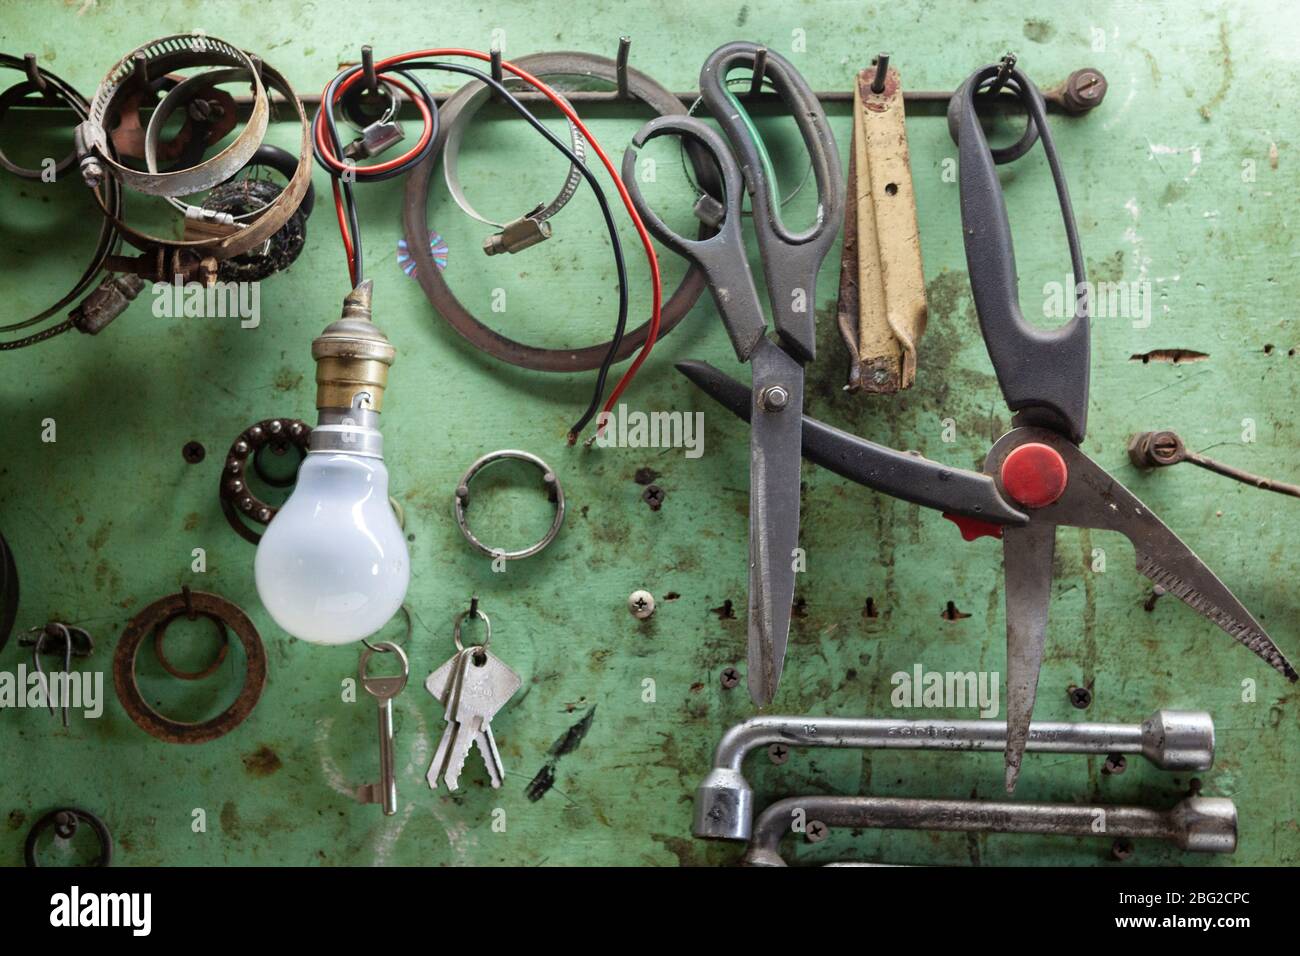 Electrical tools. Stock Photo